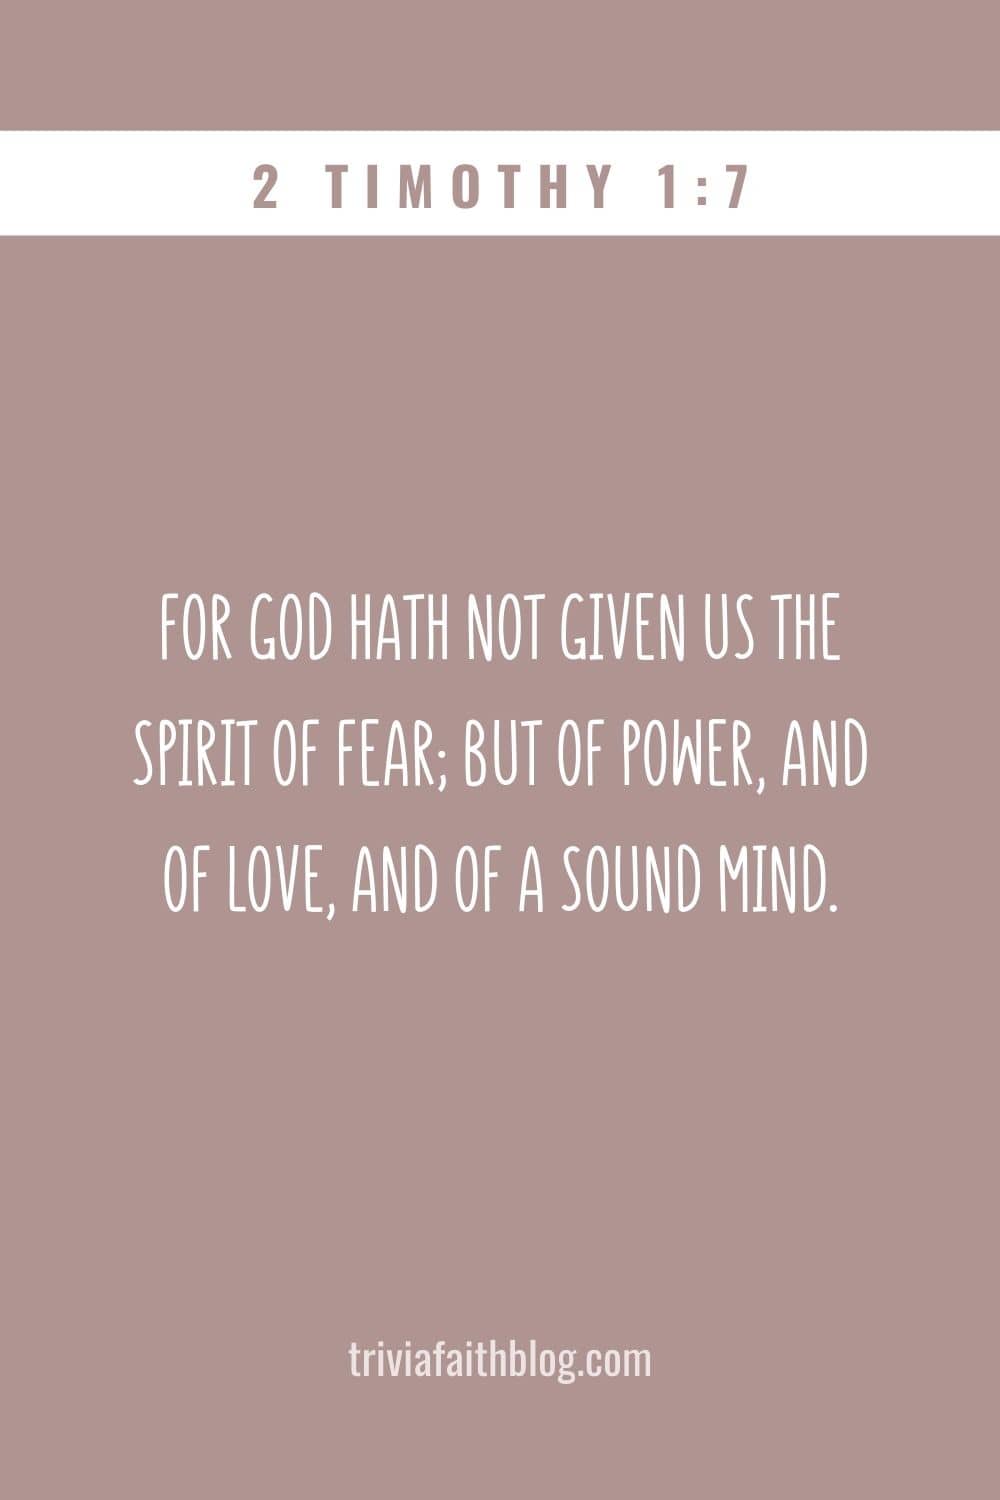 For God hath not given us the spirit of fear; but of power, and of love, and of a sound mind